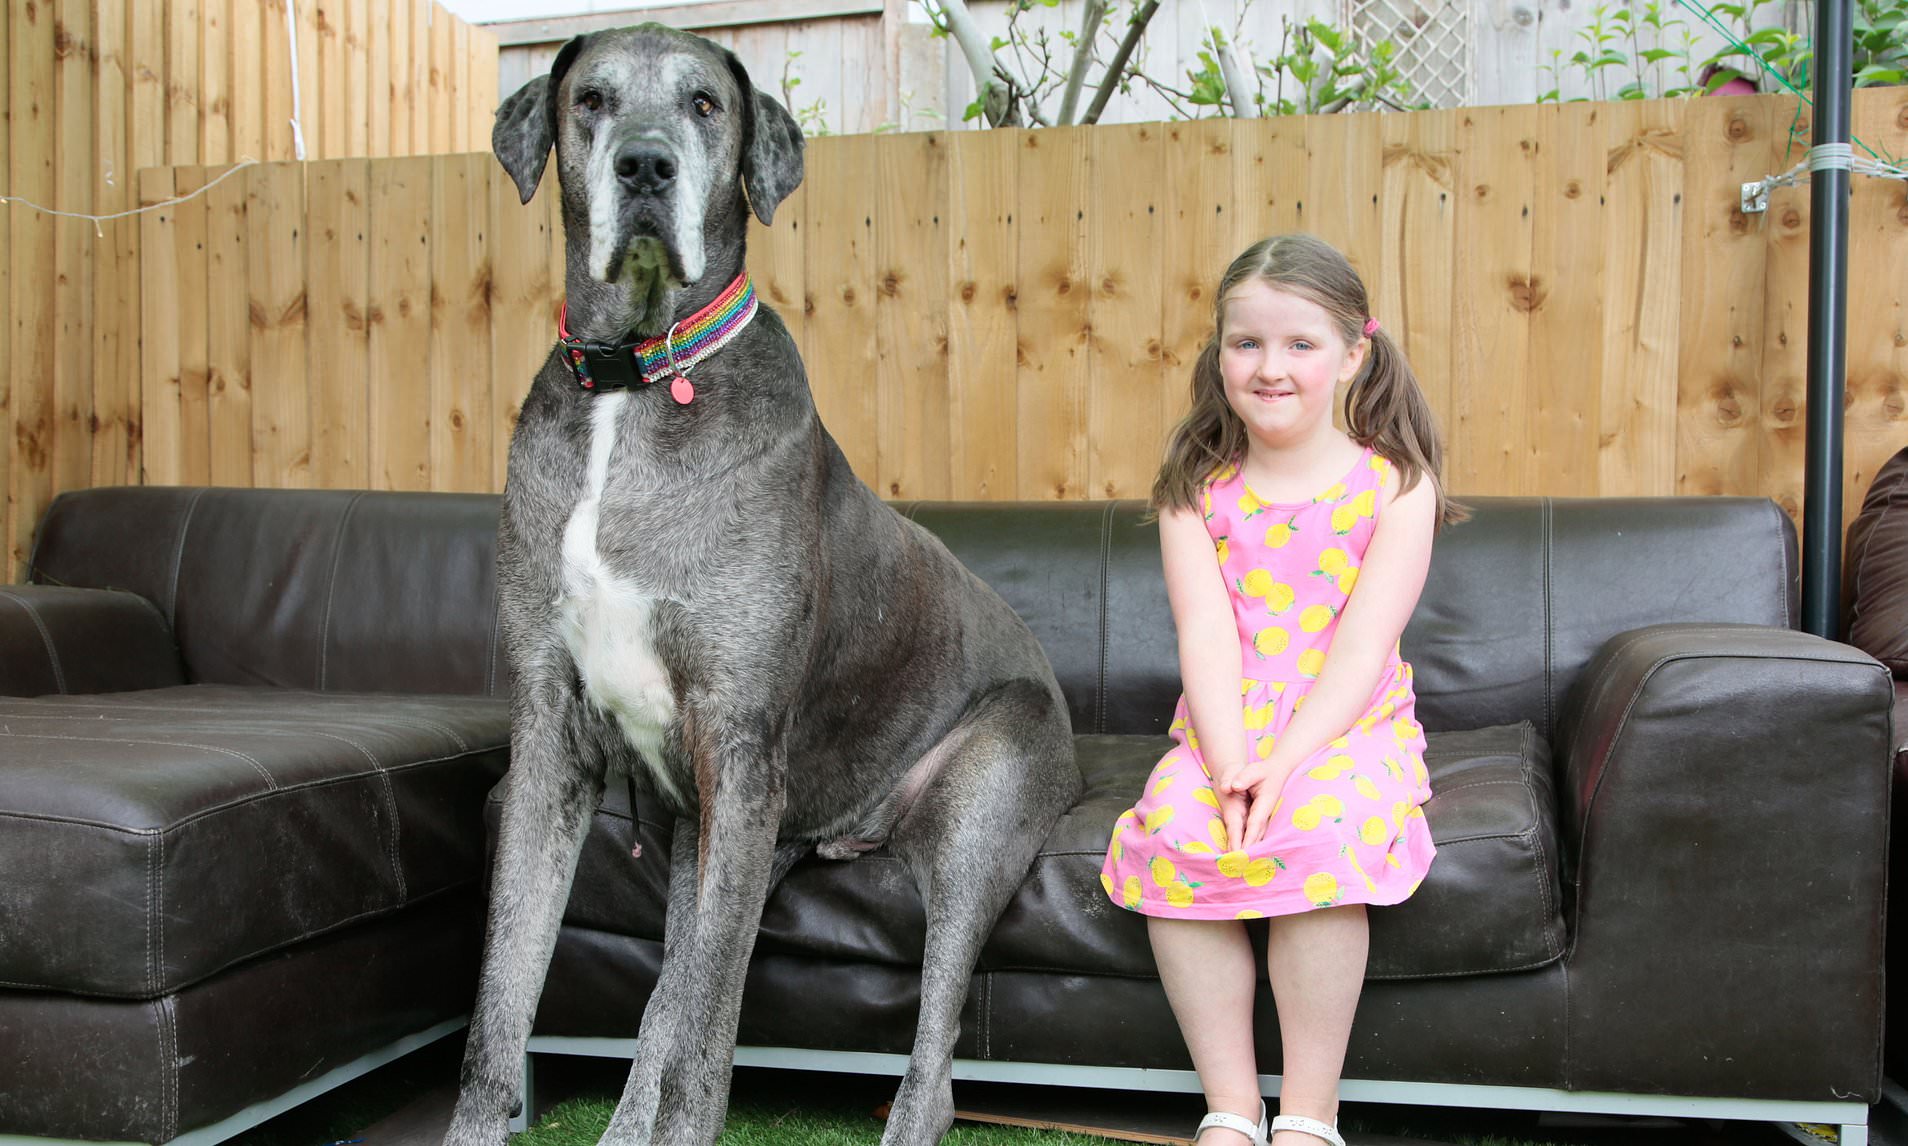 Another big milestone for 7ft Freddy: World's tallest dog thought to be  planet's oldest Great Dane | Daily Mail Online